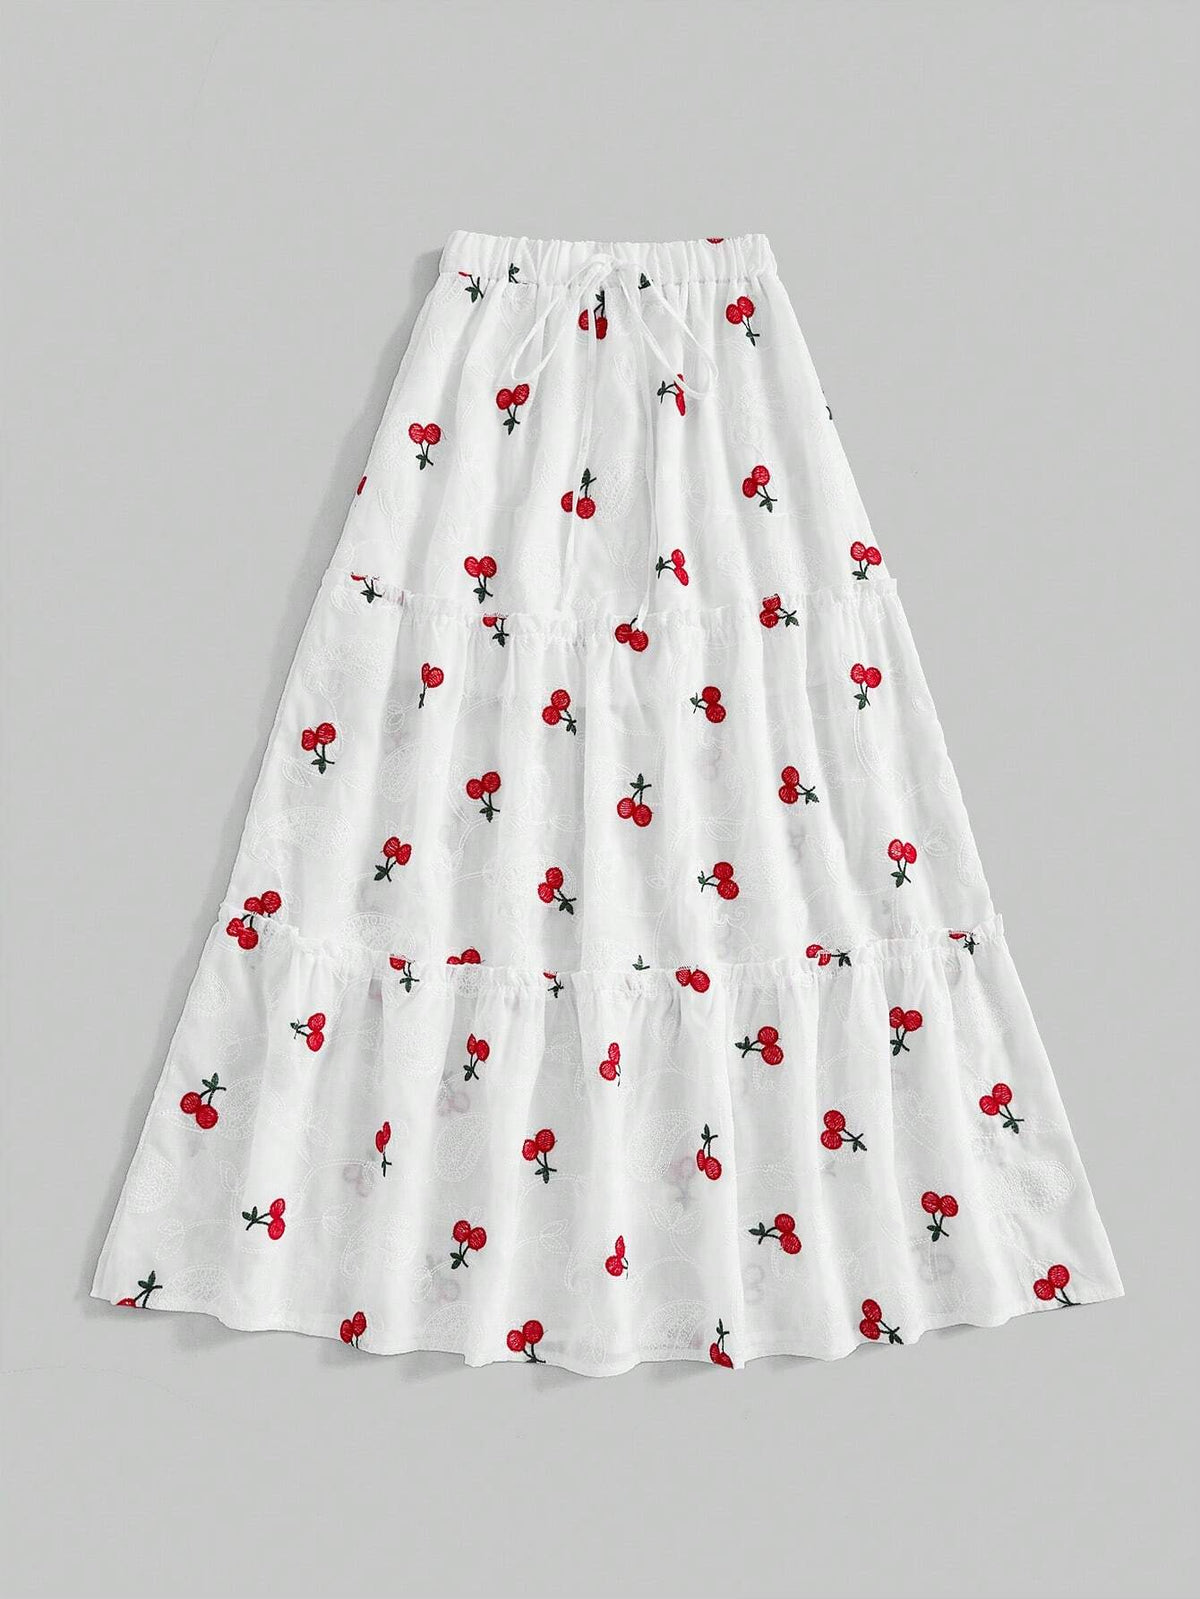 ROMWE Kawaii Women Casual Cherry Embroidery Jacquard Pleated Skirt With Lace Trim And Umbrella Hem